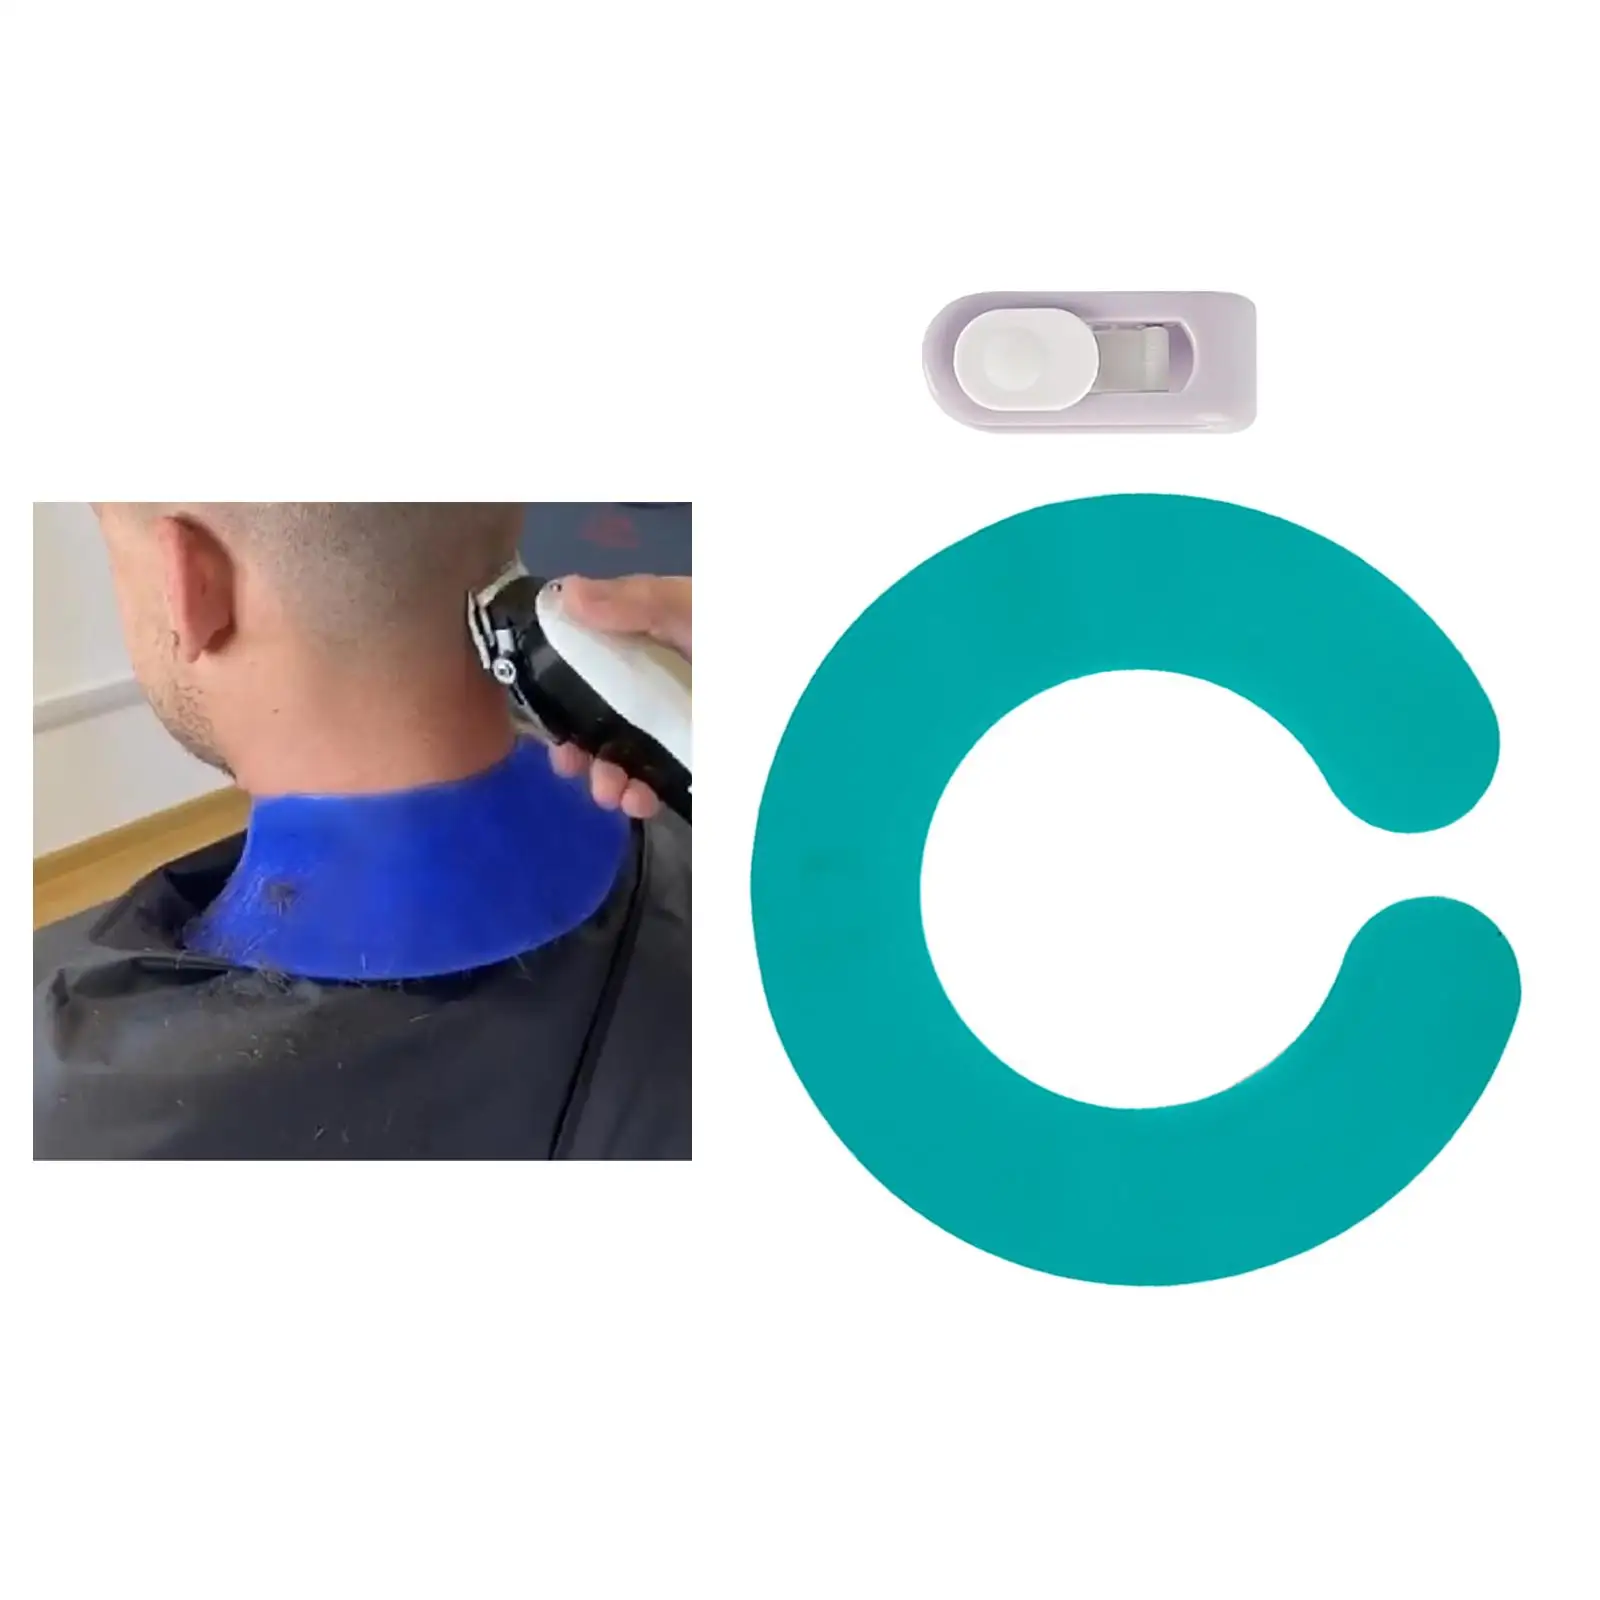 Silicone Cutting Collar Neck Shield with Buckles Professional Waterproof Adjustable Capes Guard Tool for Haircut Barber Women